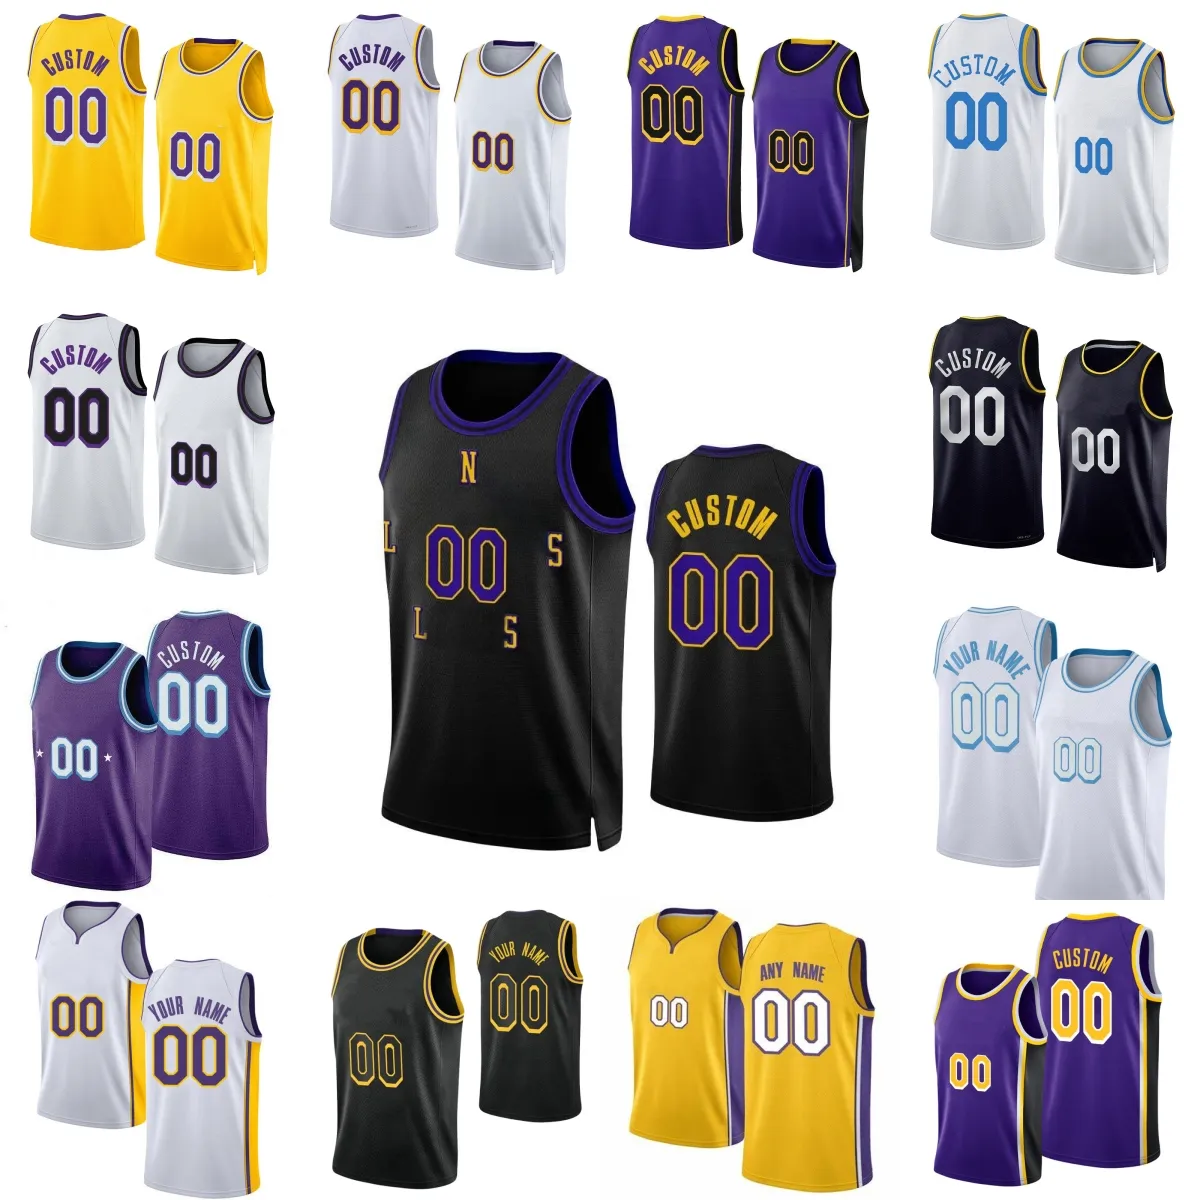 Custom 2023-24 New season Printed Basketball 23 LeBron James Jersey White Gold purple black Jerseys. Message Any number and name on the order